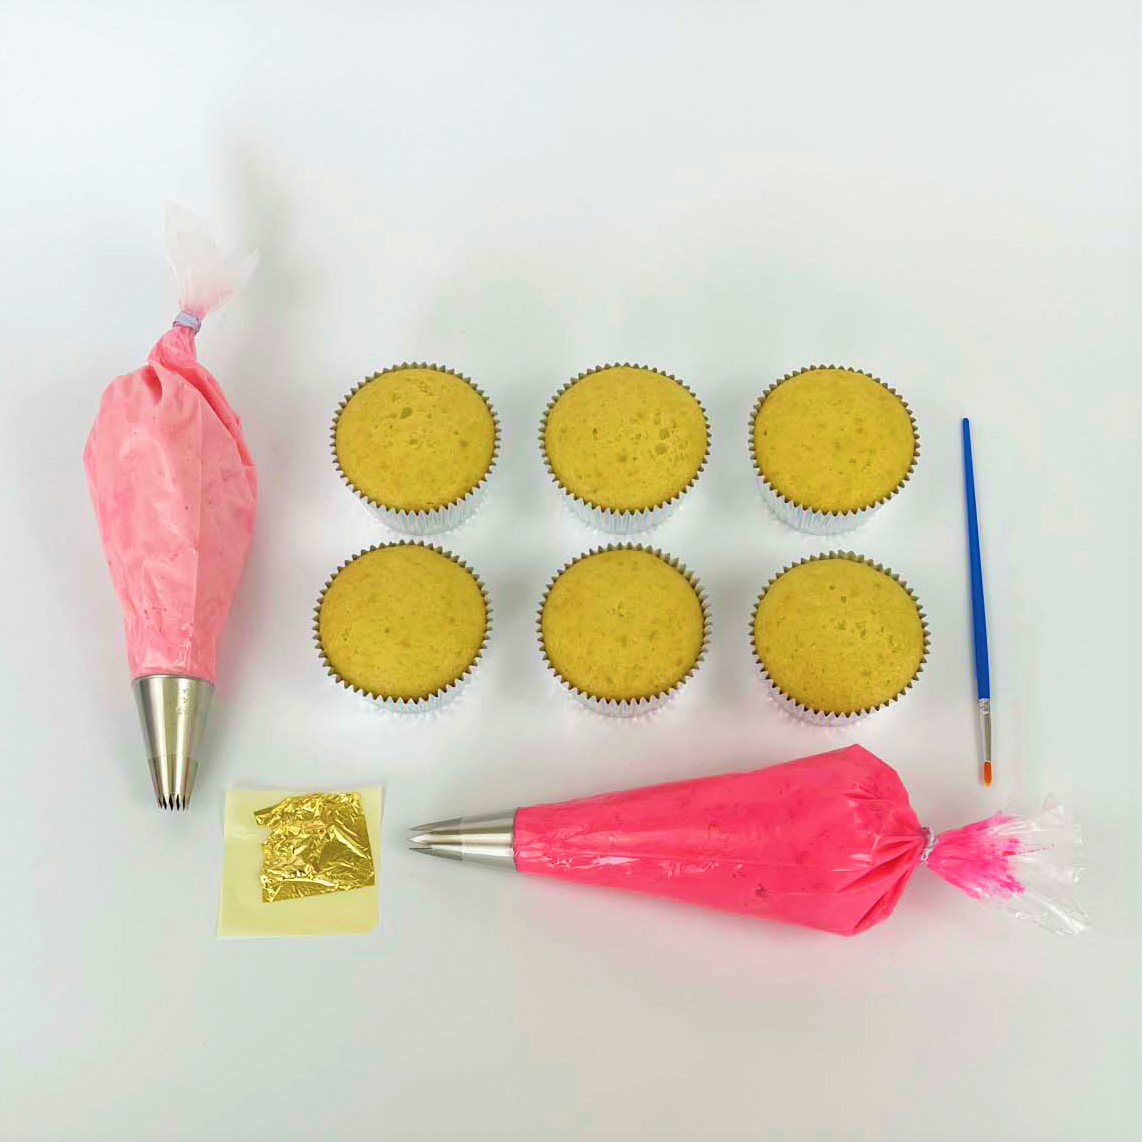 The components of the DIY La Fleur cupcake kit, including gold leaf, a paintbrush, six of the 12 cupcakes that come with the kit, and light pink and dark pink frosting in piping bags, each with a different silver piping tip.